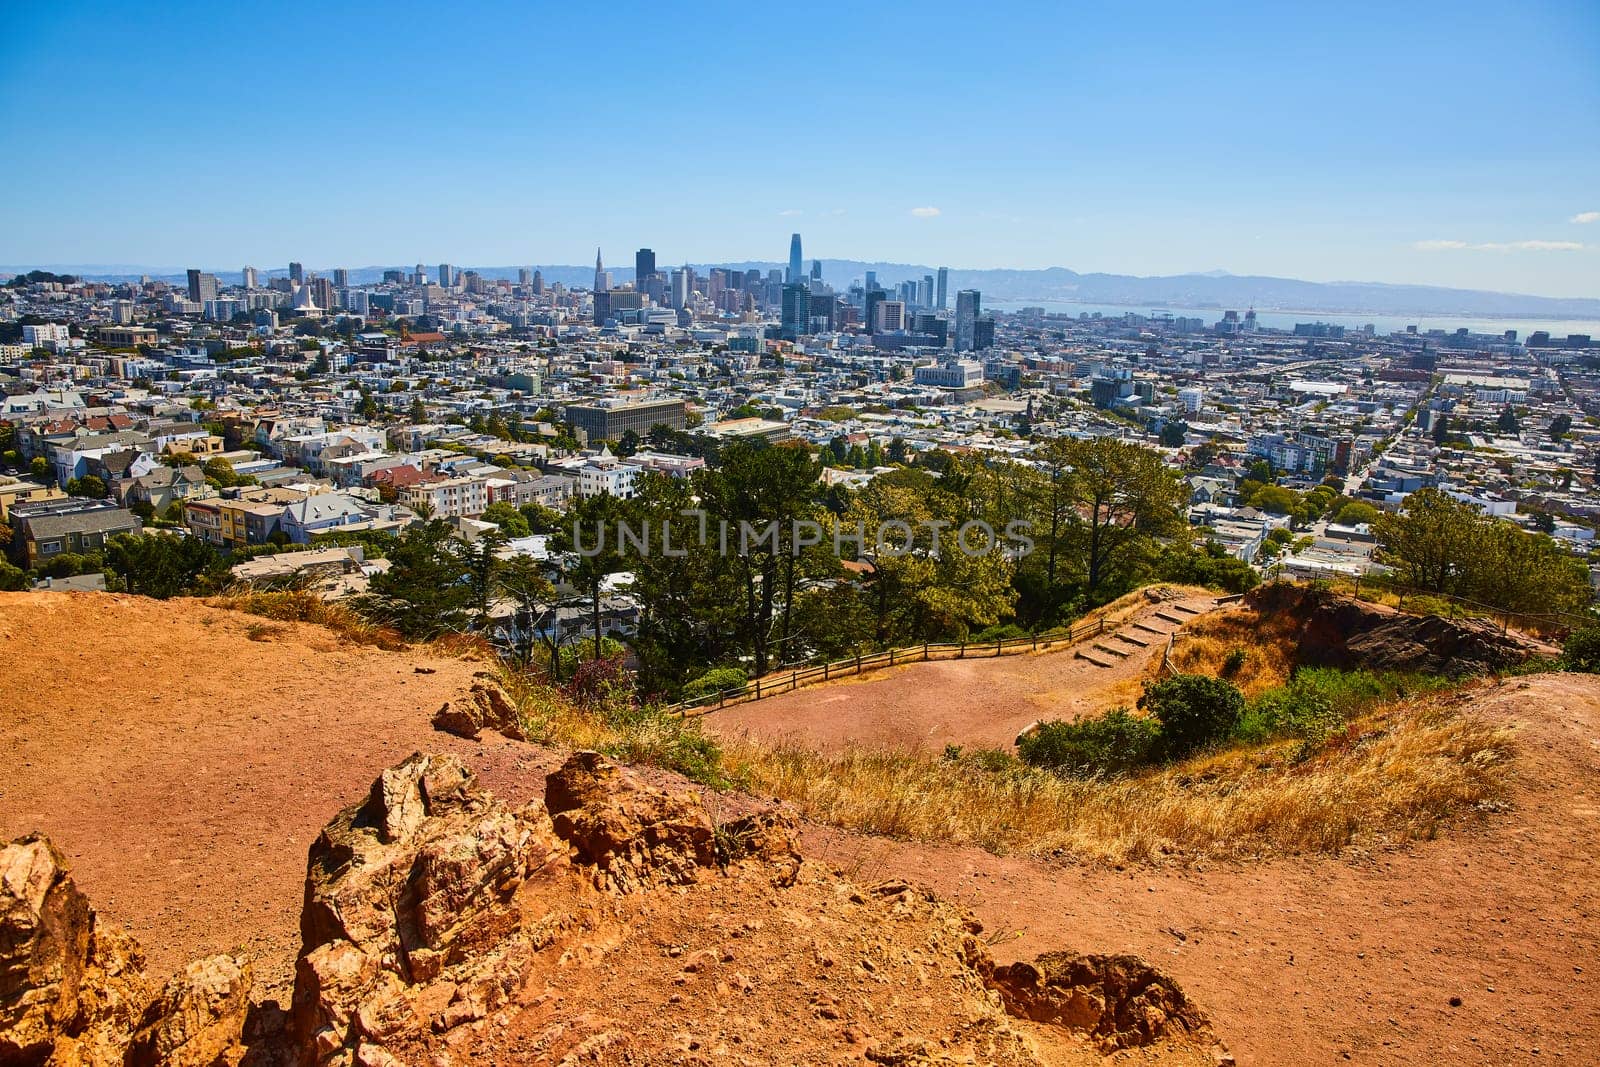 Image of Dirt park trail winding down hillside to San Francisco city and downtown with distant bay waters